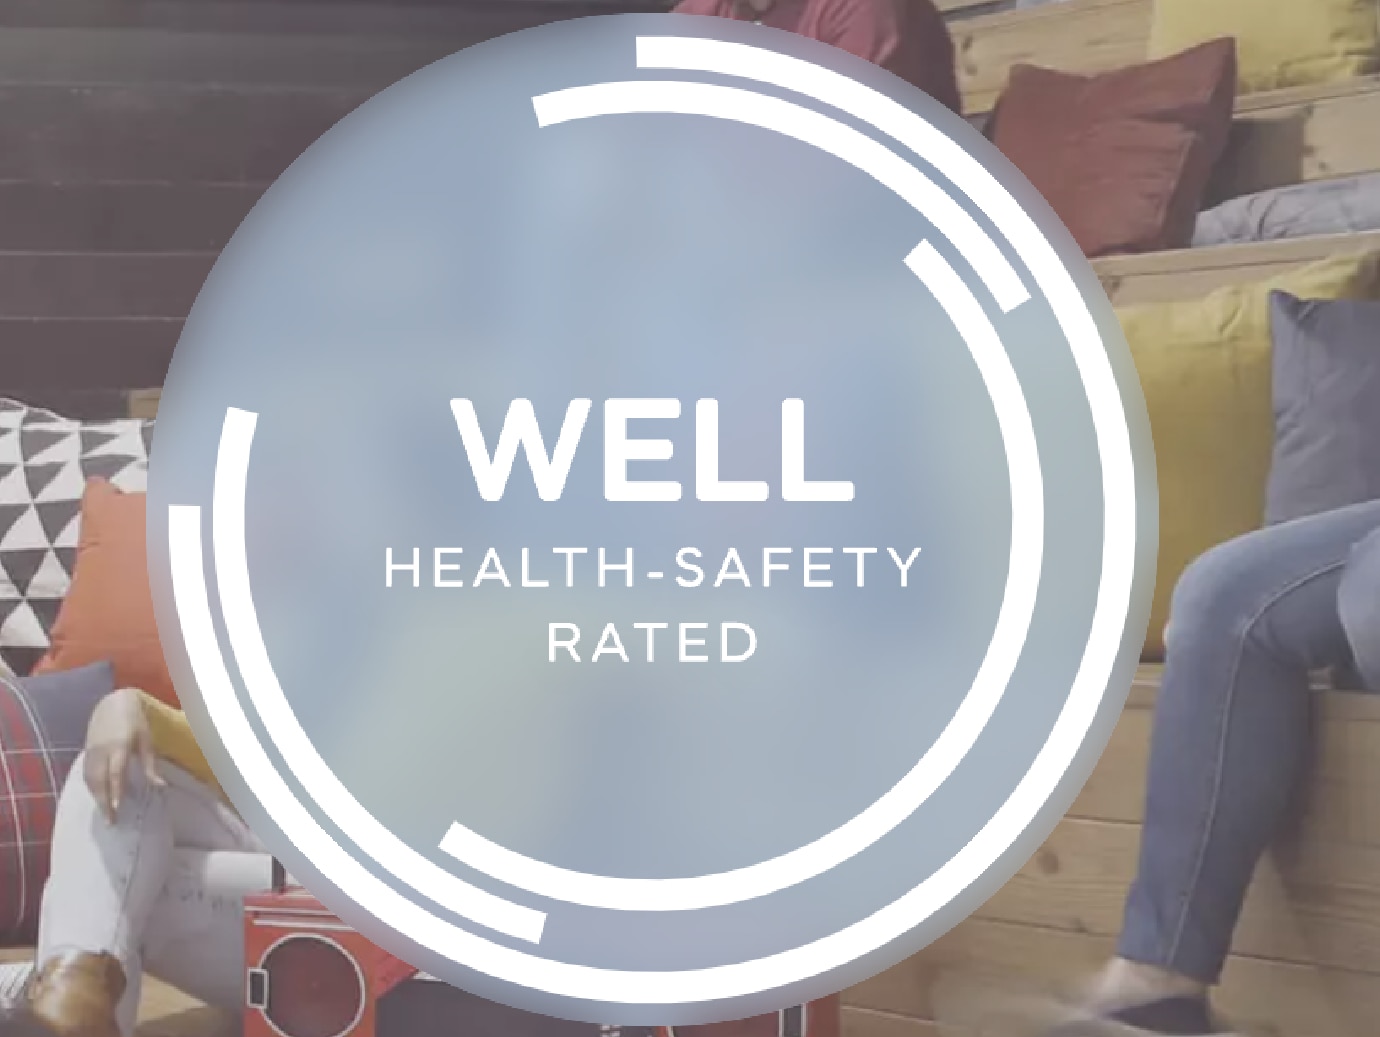 A logo displaying a health and safety rating by the Well organisation